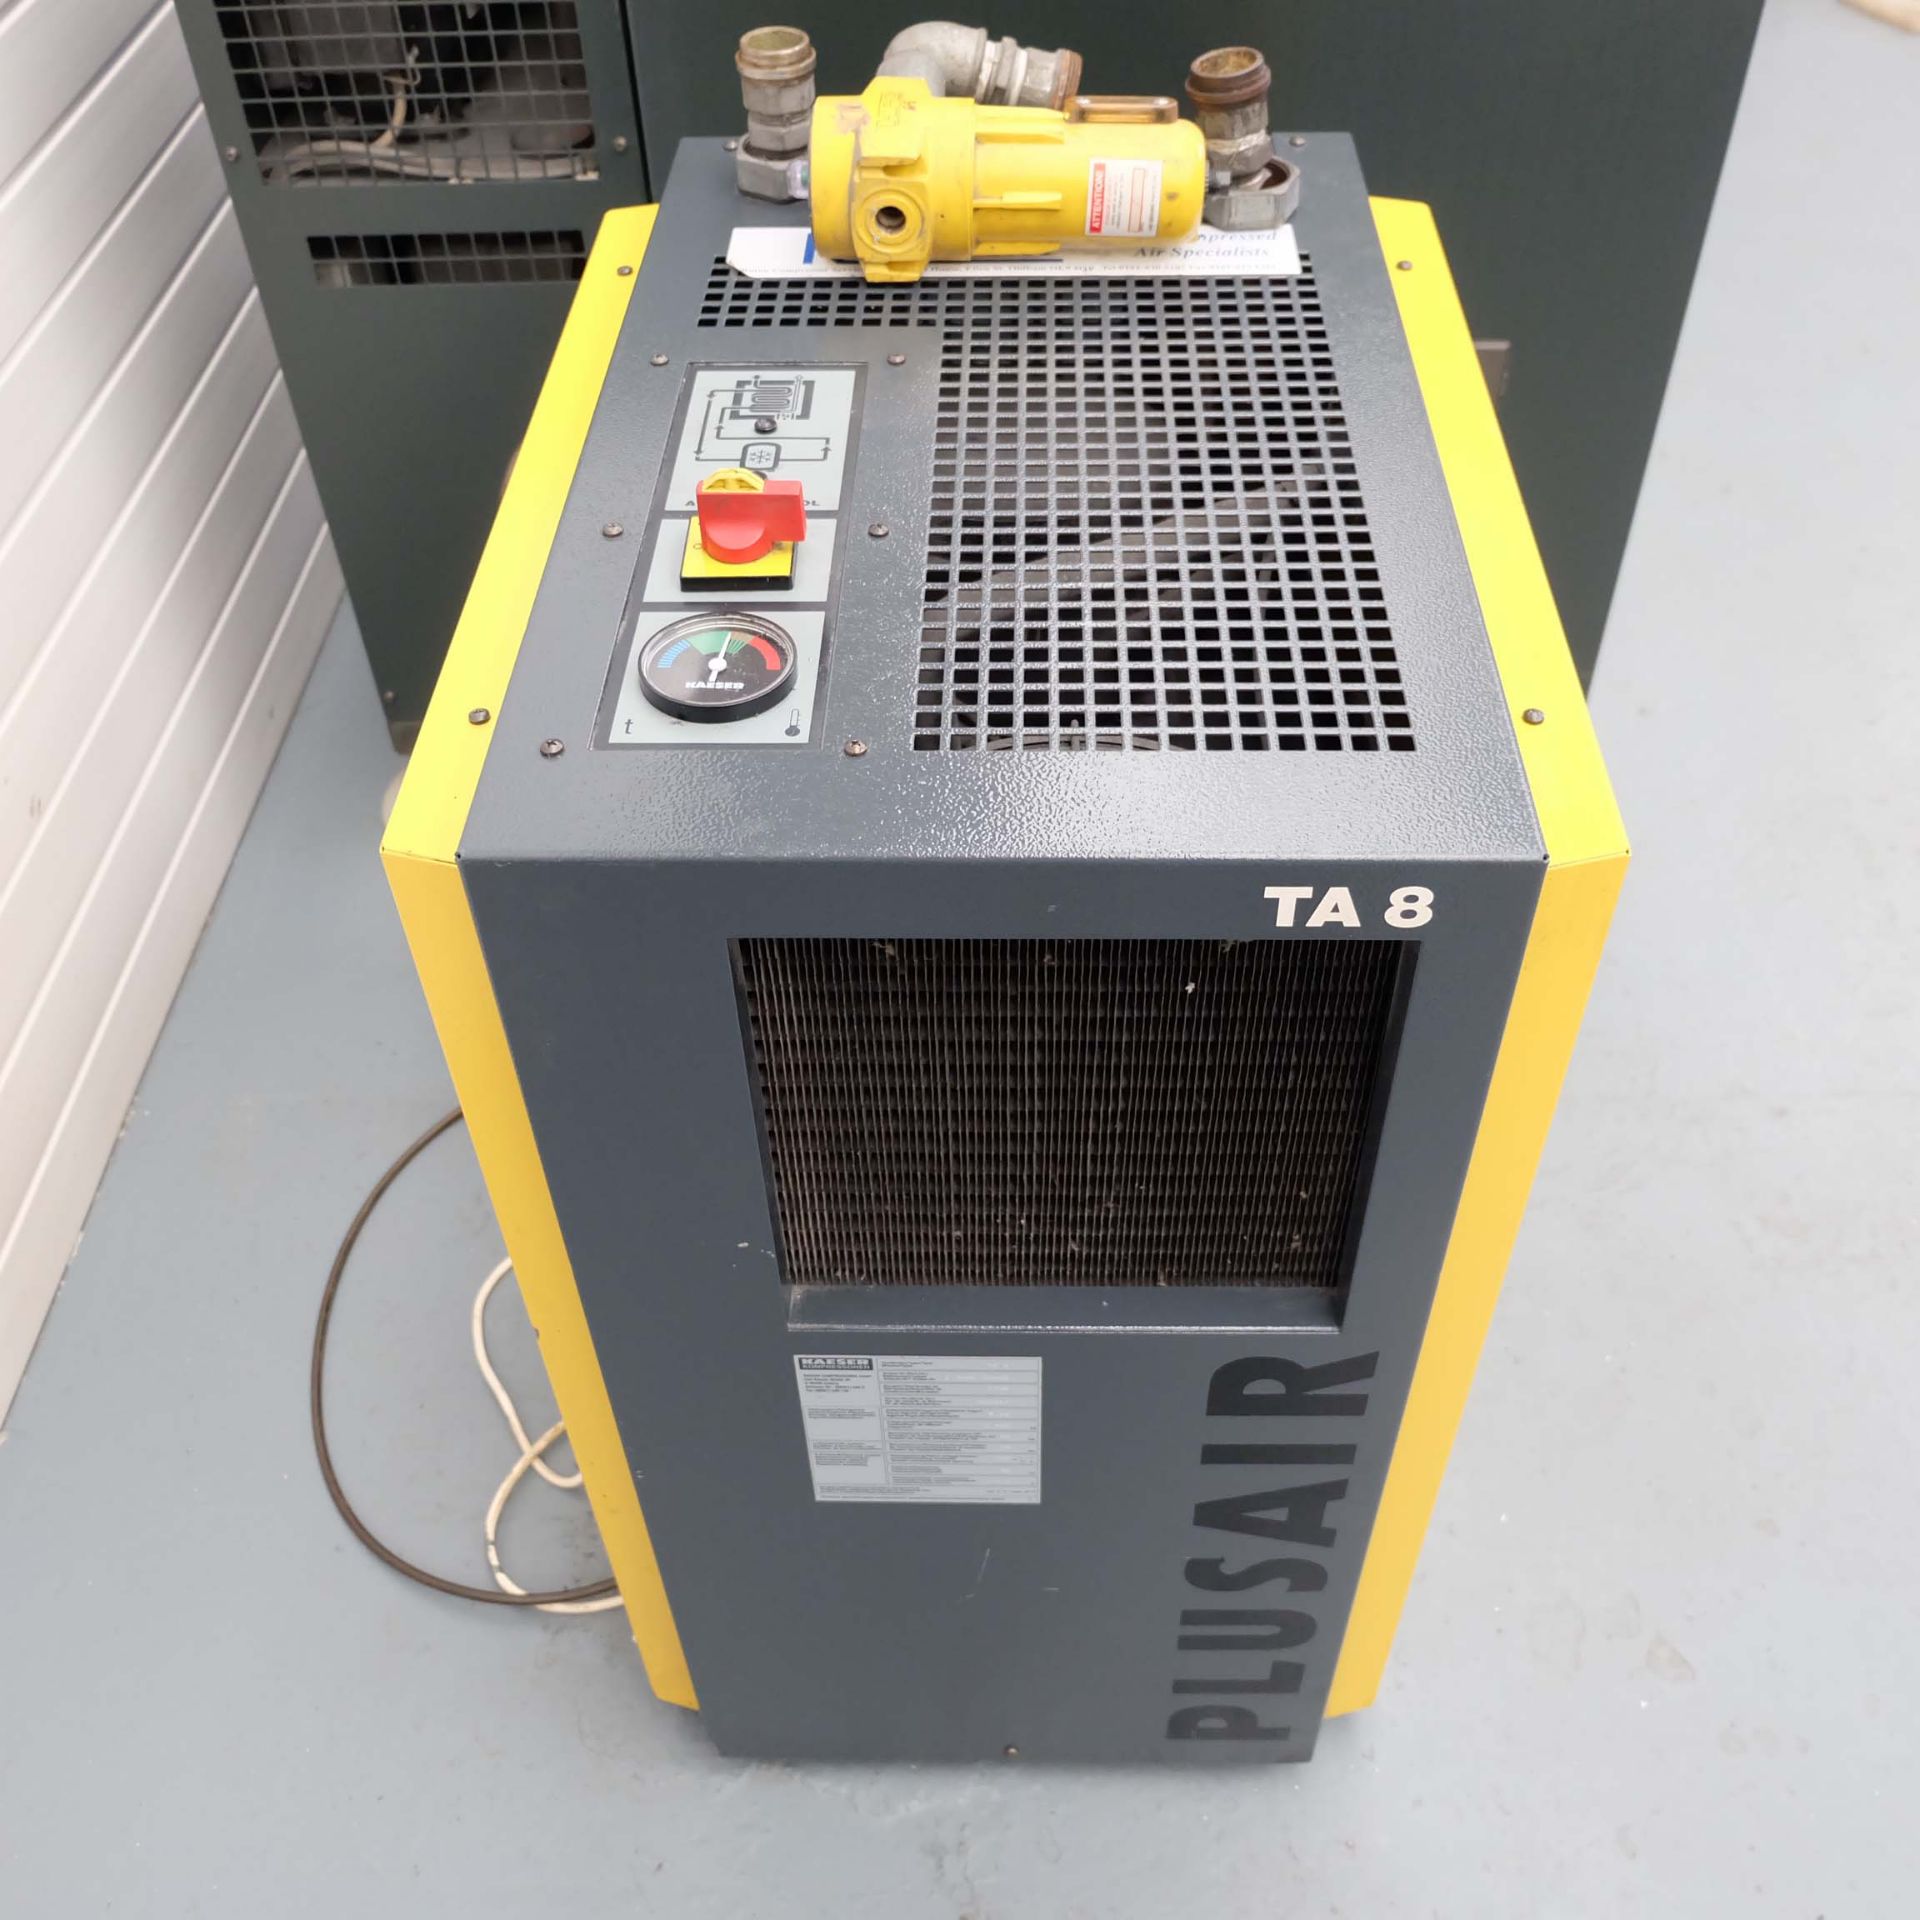 HPC Kaeser Model SK22T Rotary Air Compressor With Air Dryer Model TA8 and 350 Ltr Air Reciever Rated - Image 9 of 15